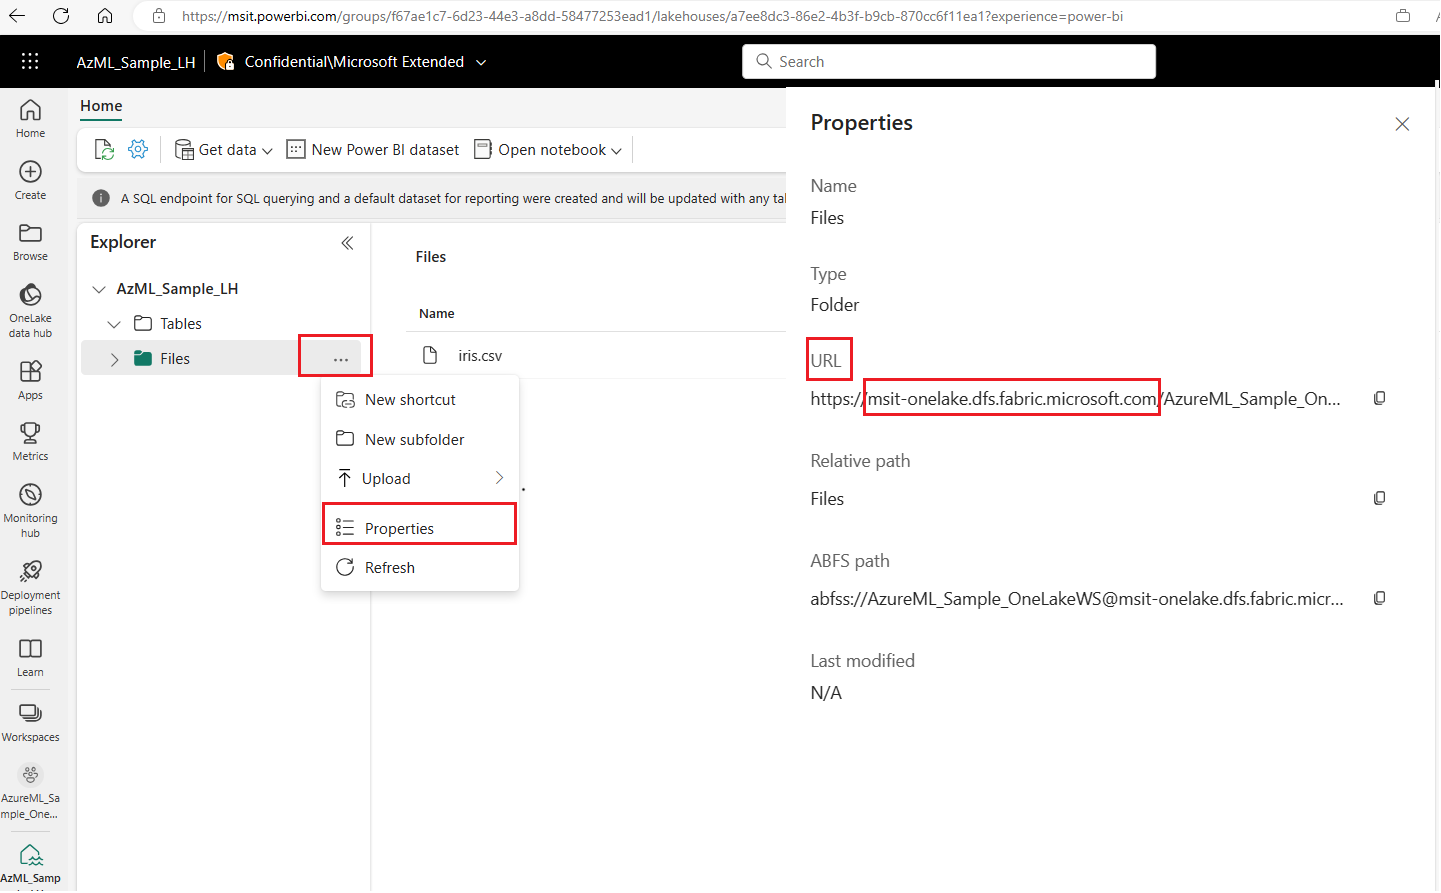 Screenshot that shows Microsoft Fabric endpoint details in the Microsoft Fabric UI.